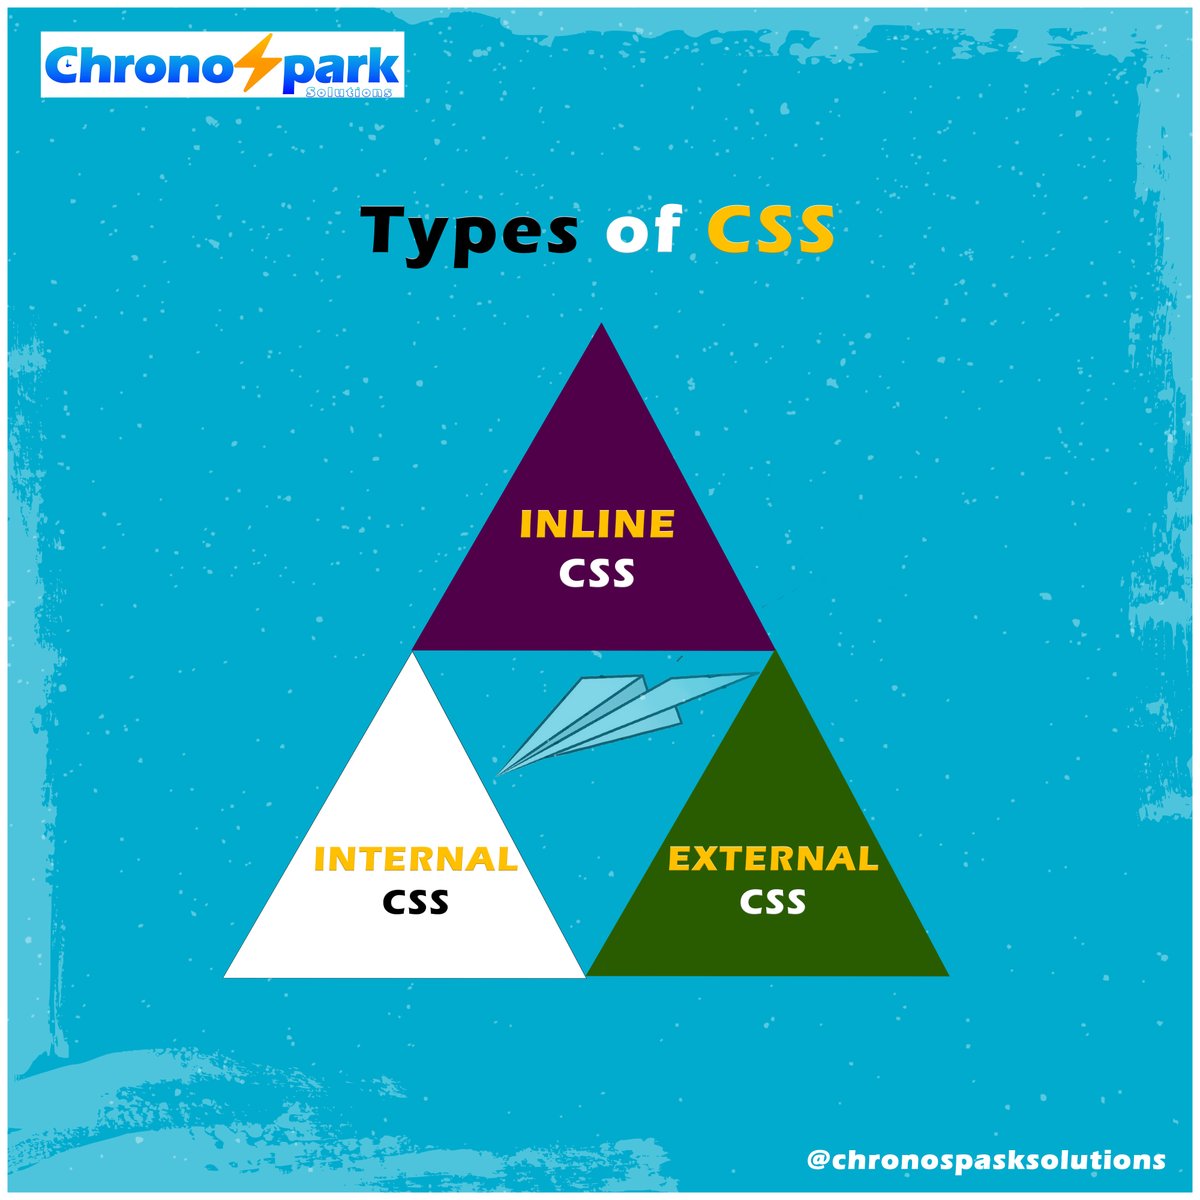 🚀 Elevate your web design game with the power of CSS! 💻✨

Which type of CSS do you prefer to use? Share your thoughts in the comments below! 🔗 #WebDesign #CSS #FrontEndDevelopment #ChronoSparkSolutions #TechTips 🎨✨